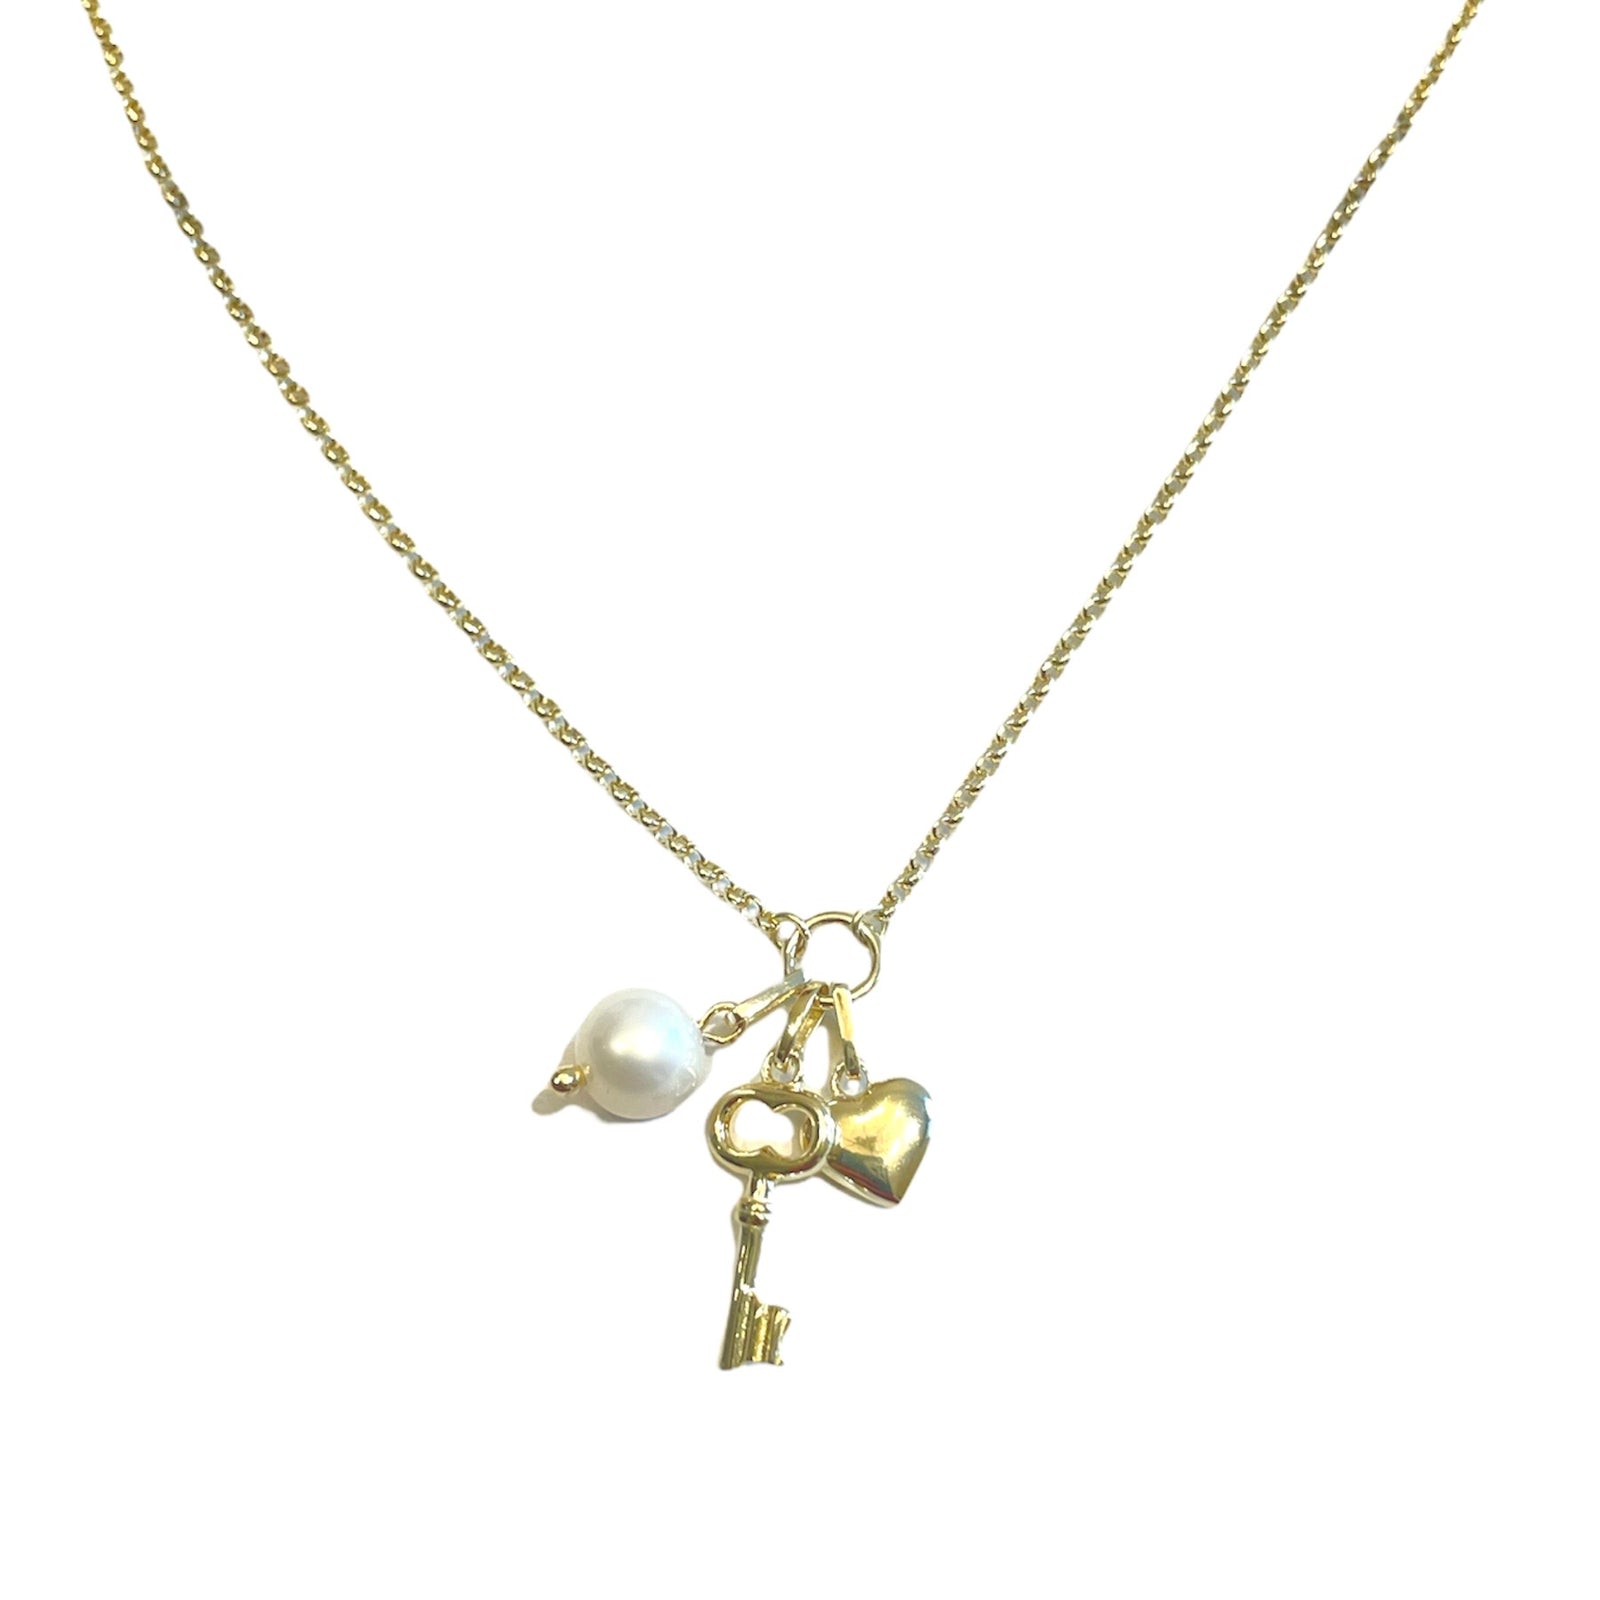 Key Heart charms necklace